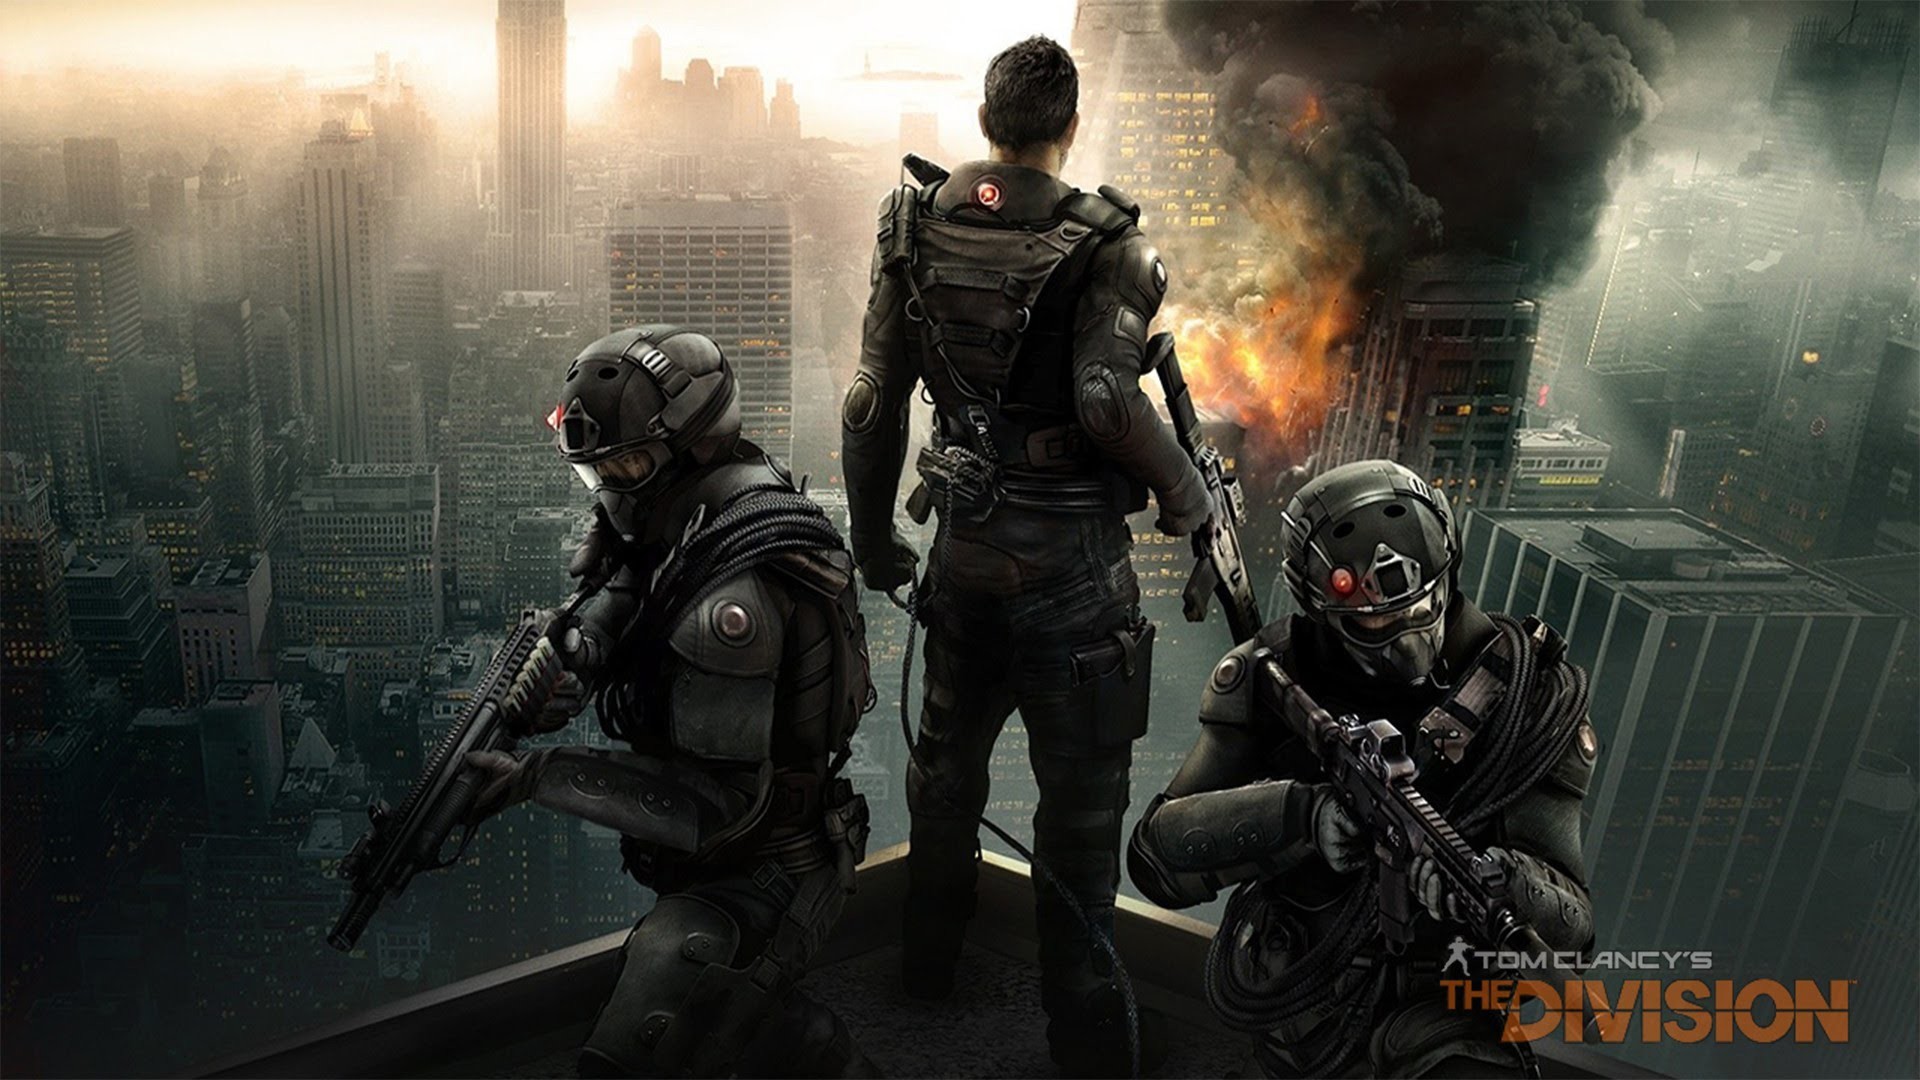 1920x1080 Download Original Size. ,. The Division Rooftop firefight ...